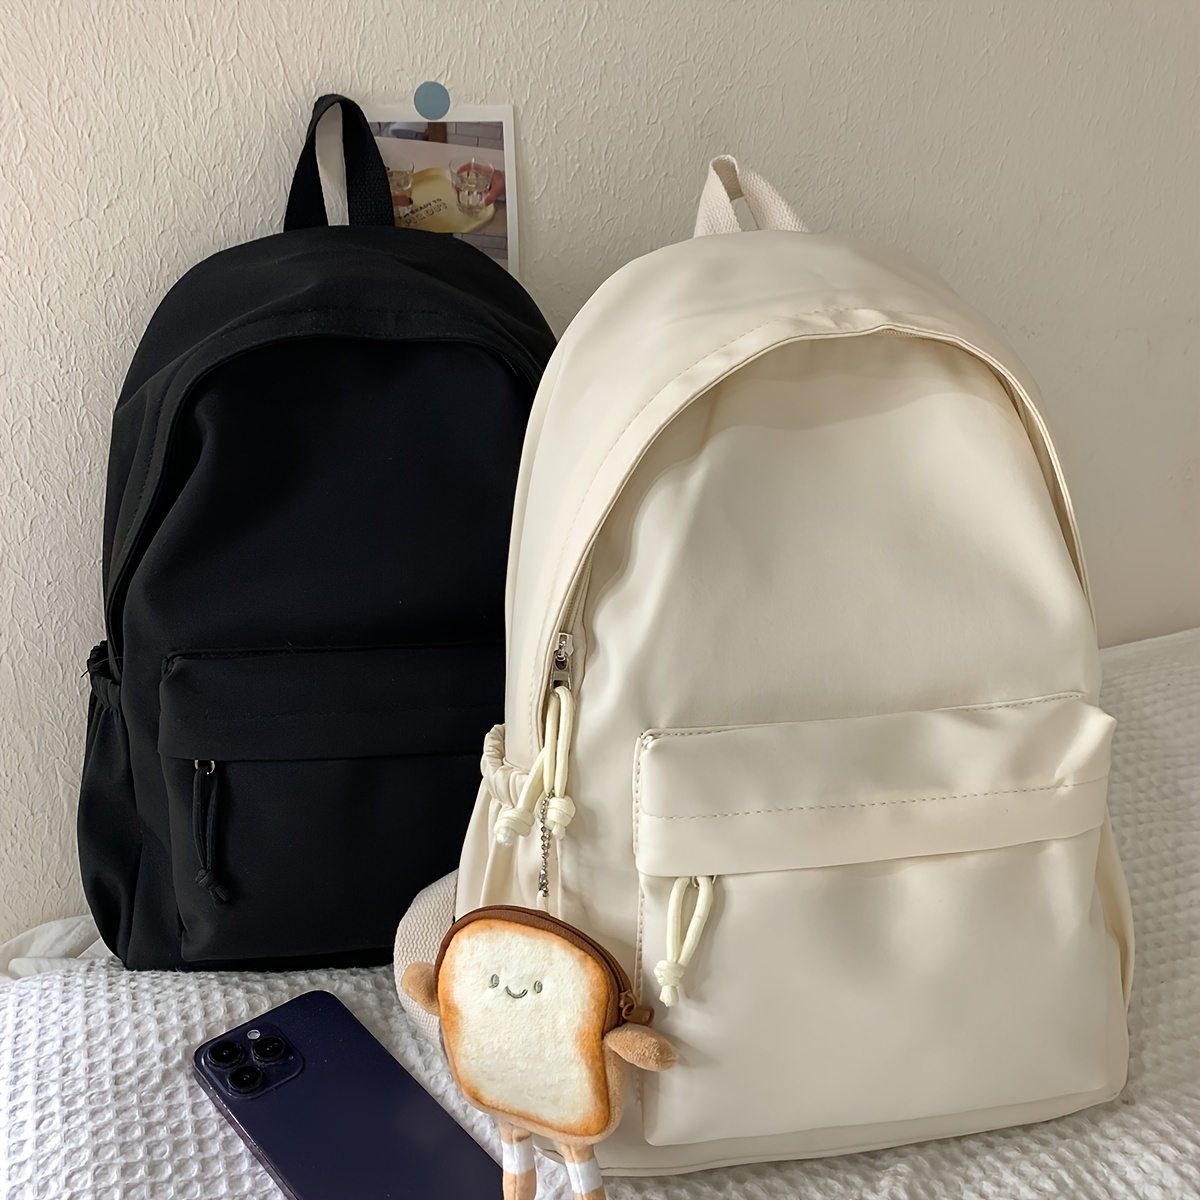 

Simple Solid Color Casual Backpack, Lightweight Versatile High School Student Bag, Versatile Solid Color Daypacks For Hanging Out